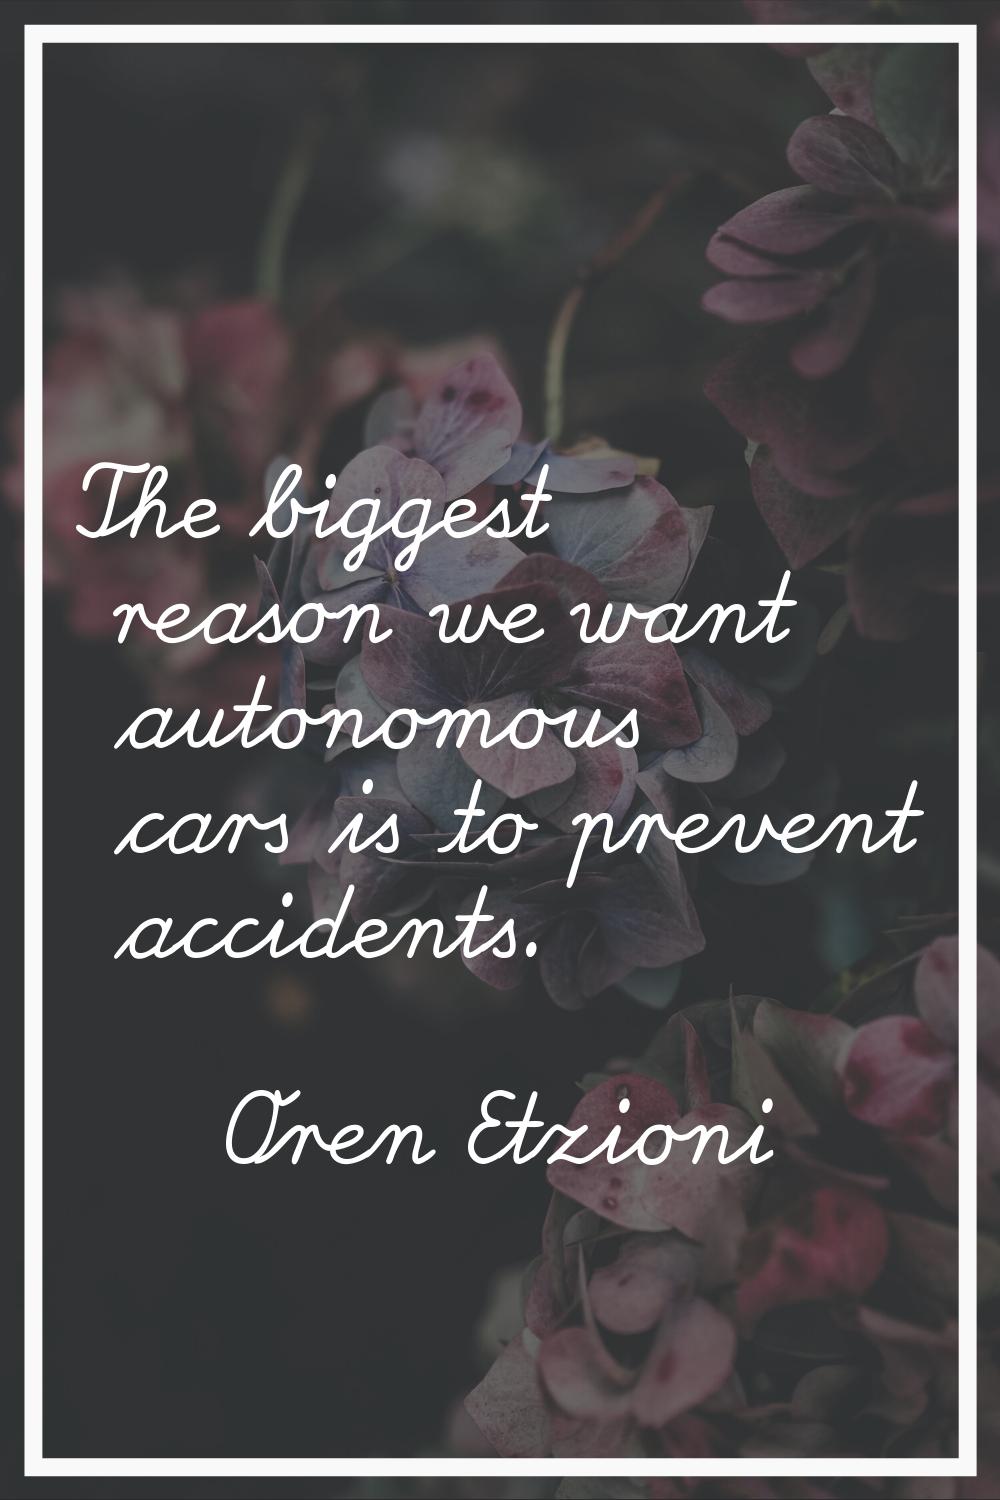 The biggest reason we want autonomous cars is to prevent accidents.